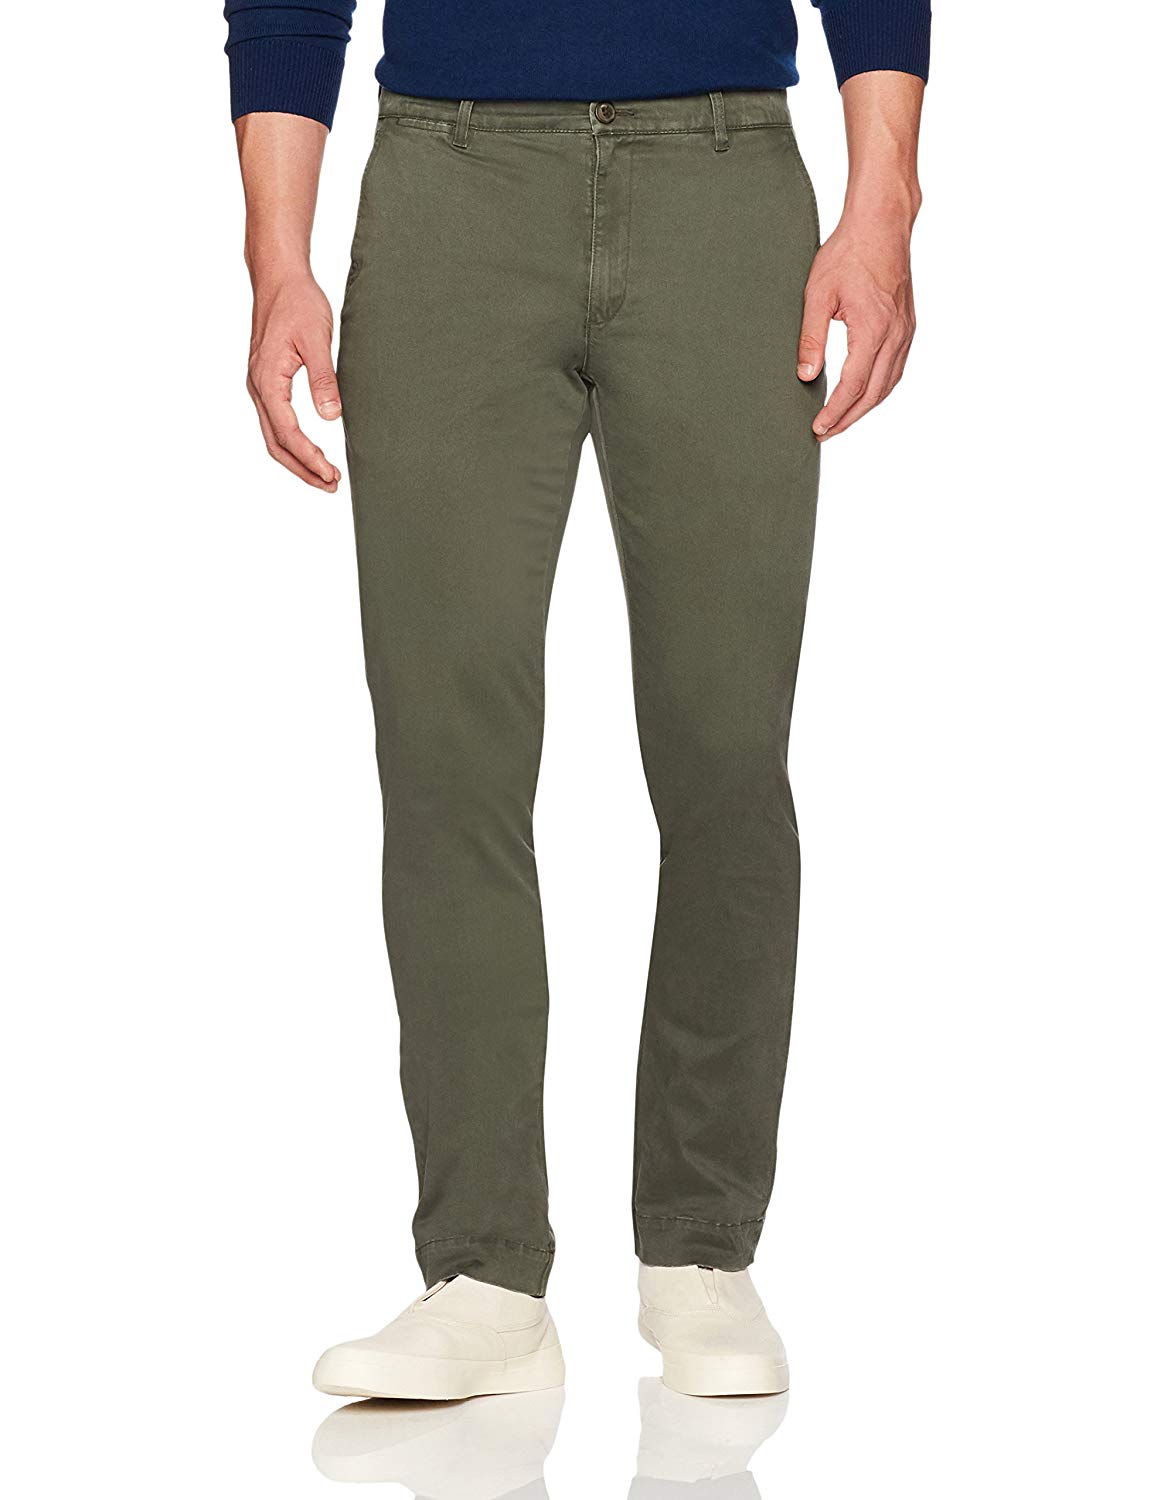 Goodthreads Men's Slim-Fit Washed Stretch Chino Pant,, Olive, Size 34W ...